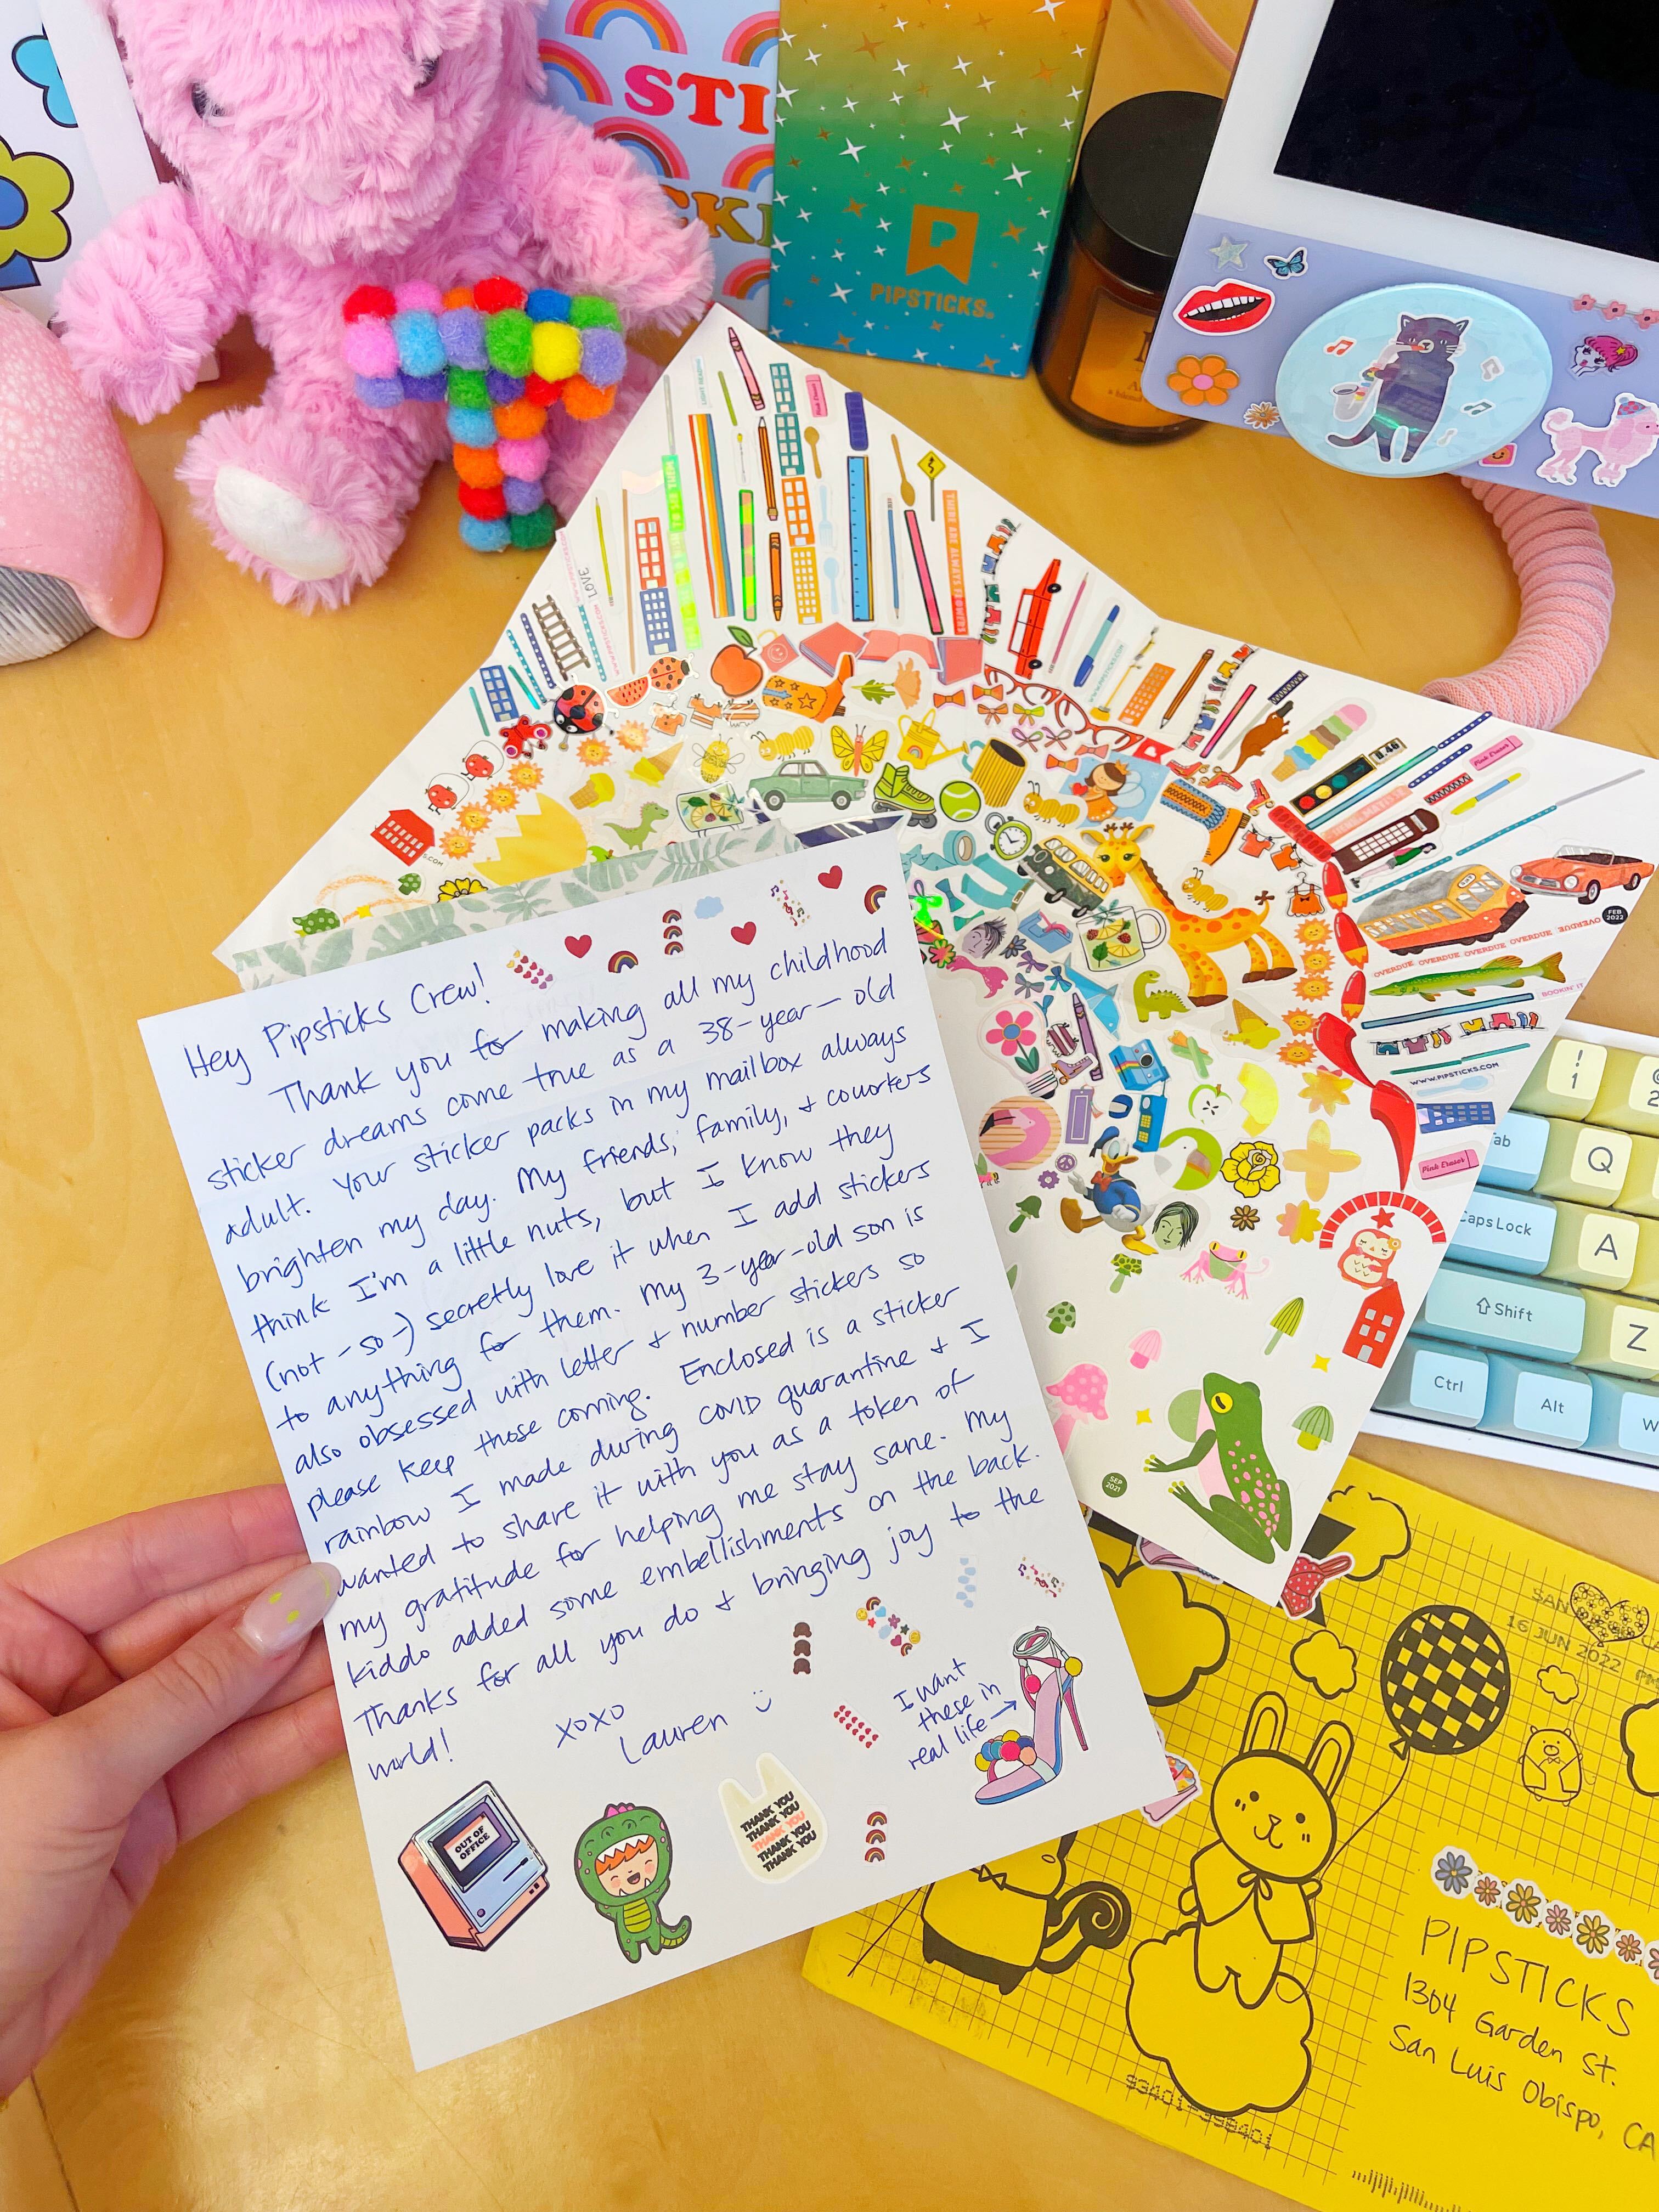 Fanmail Friday: “Thanks for making my childhood sticker dreams come true”